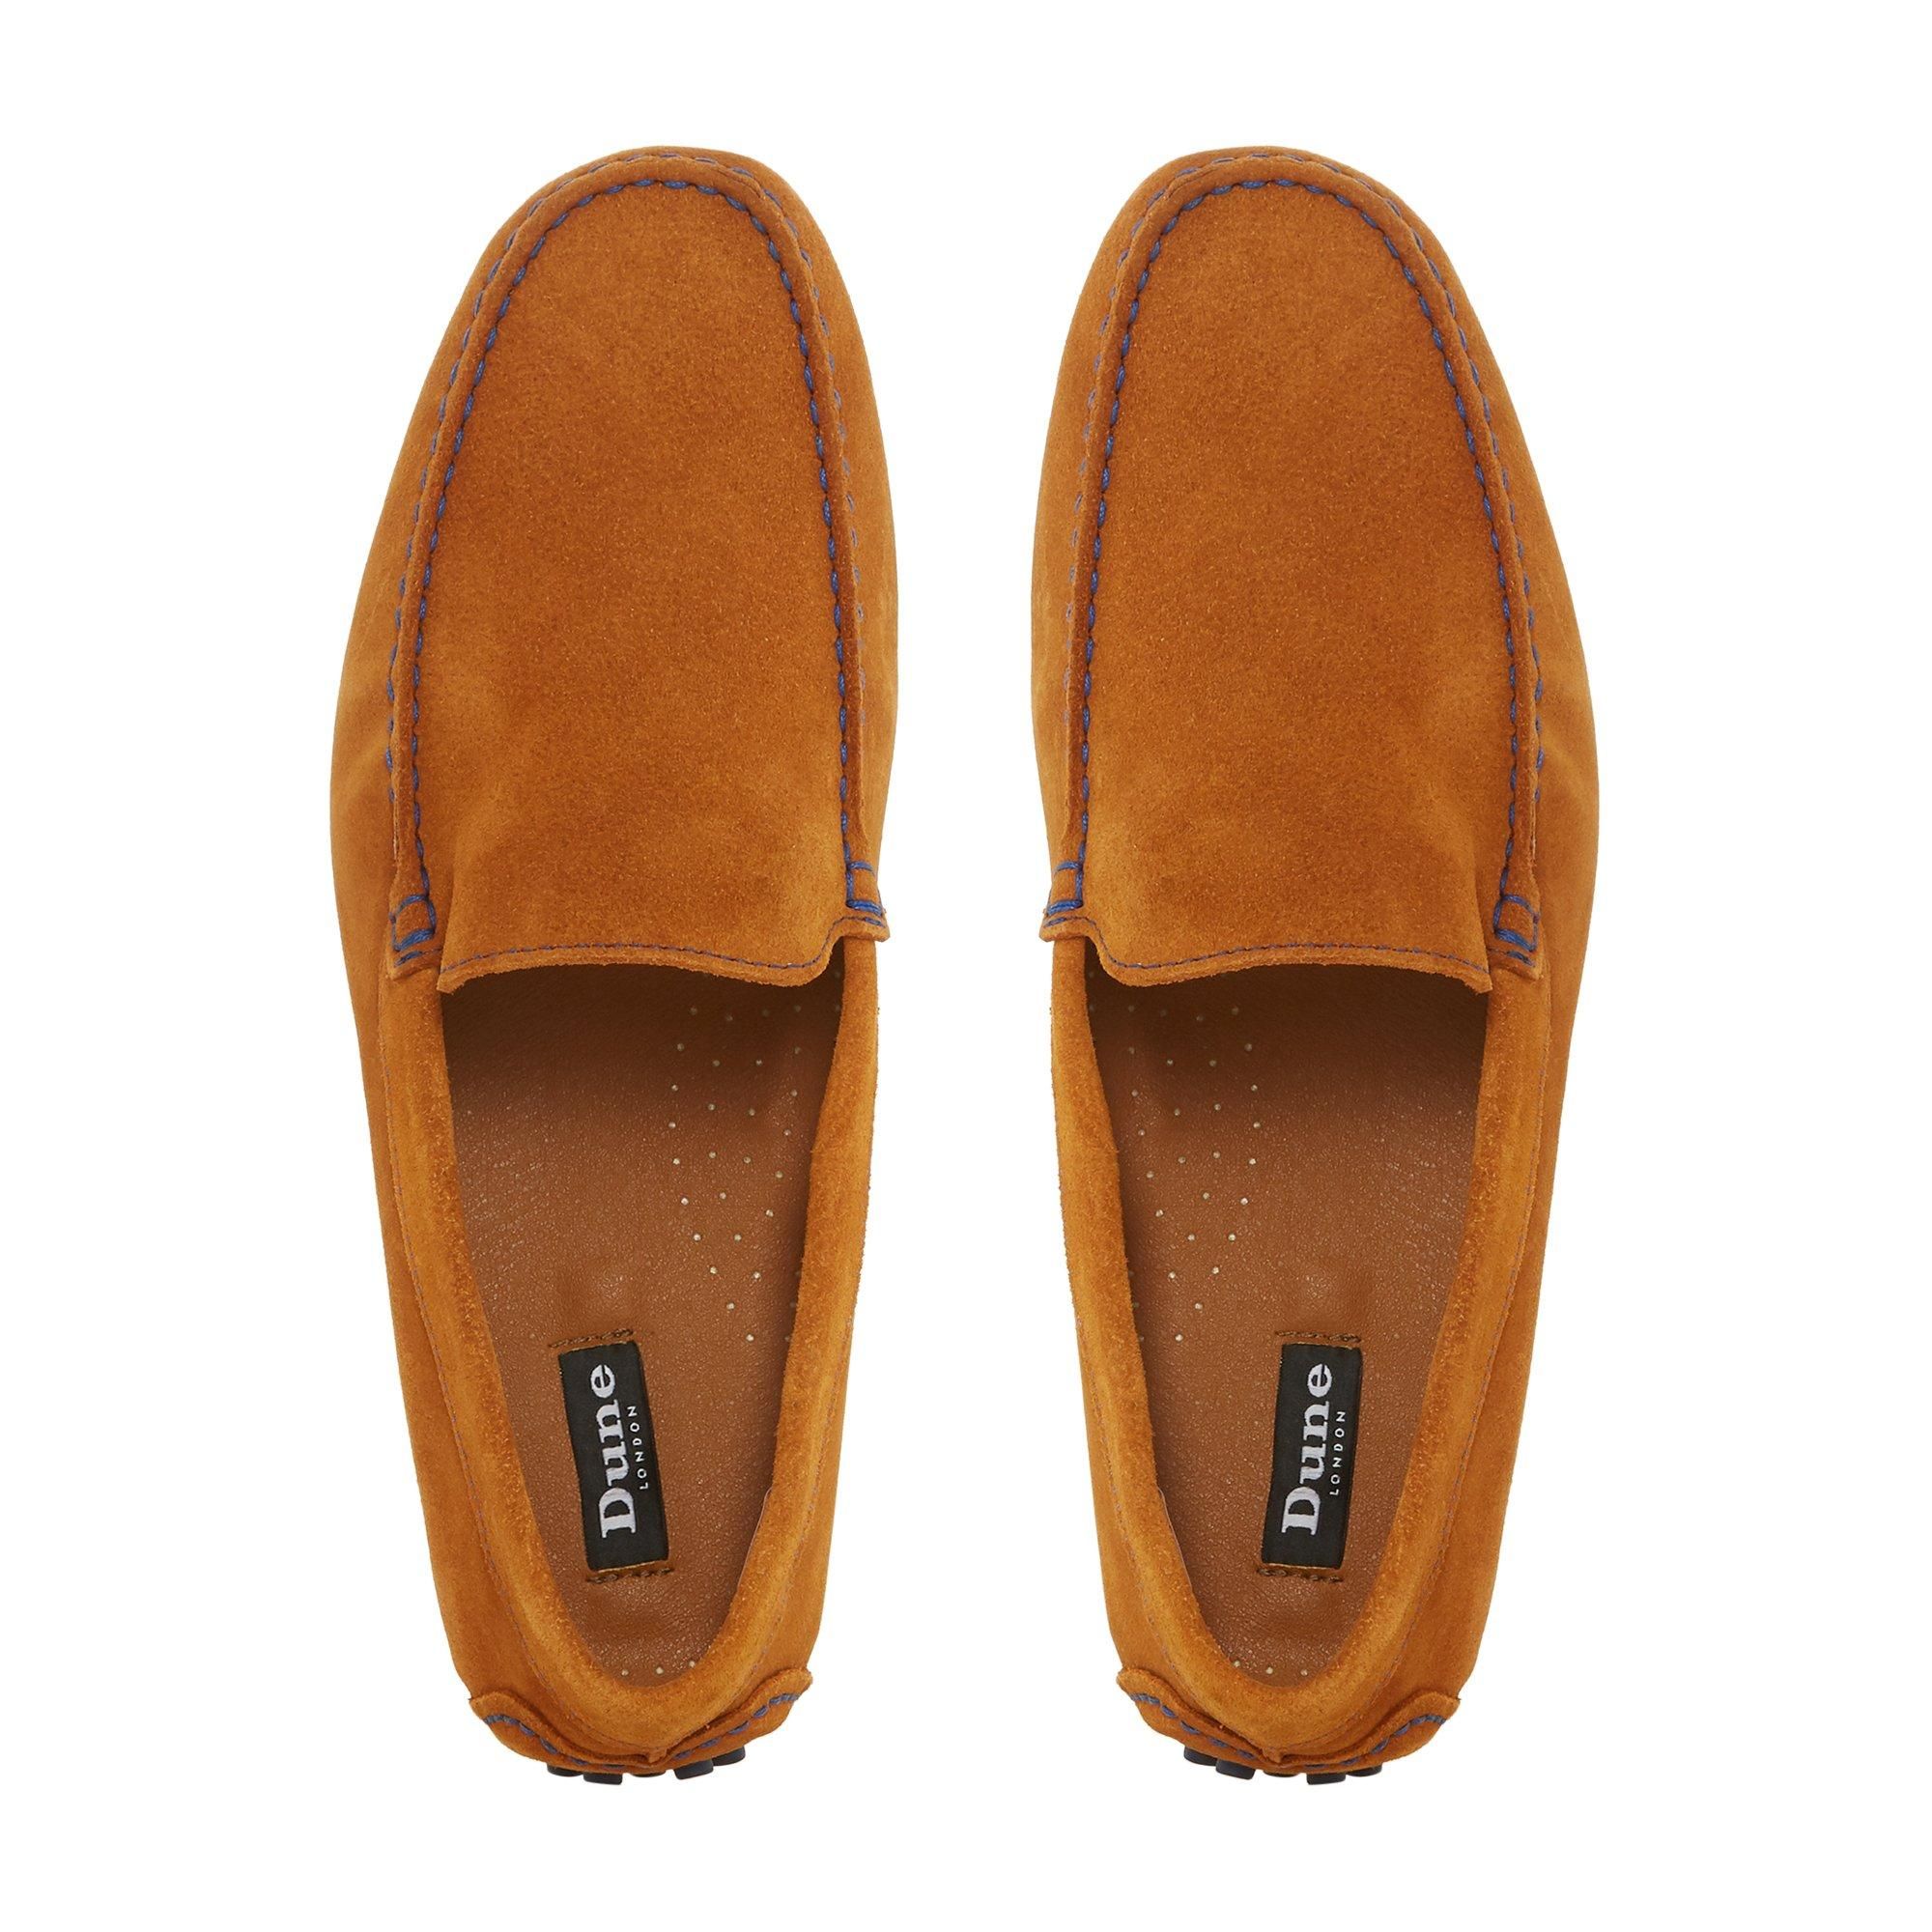 Create smart-casual looks with the Boabab loafer from Dune London. Showcasing a sleek driver design with contrast apron stitching. Complete with a smooth suede upper and practical rubber sole.